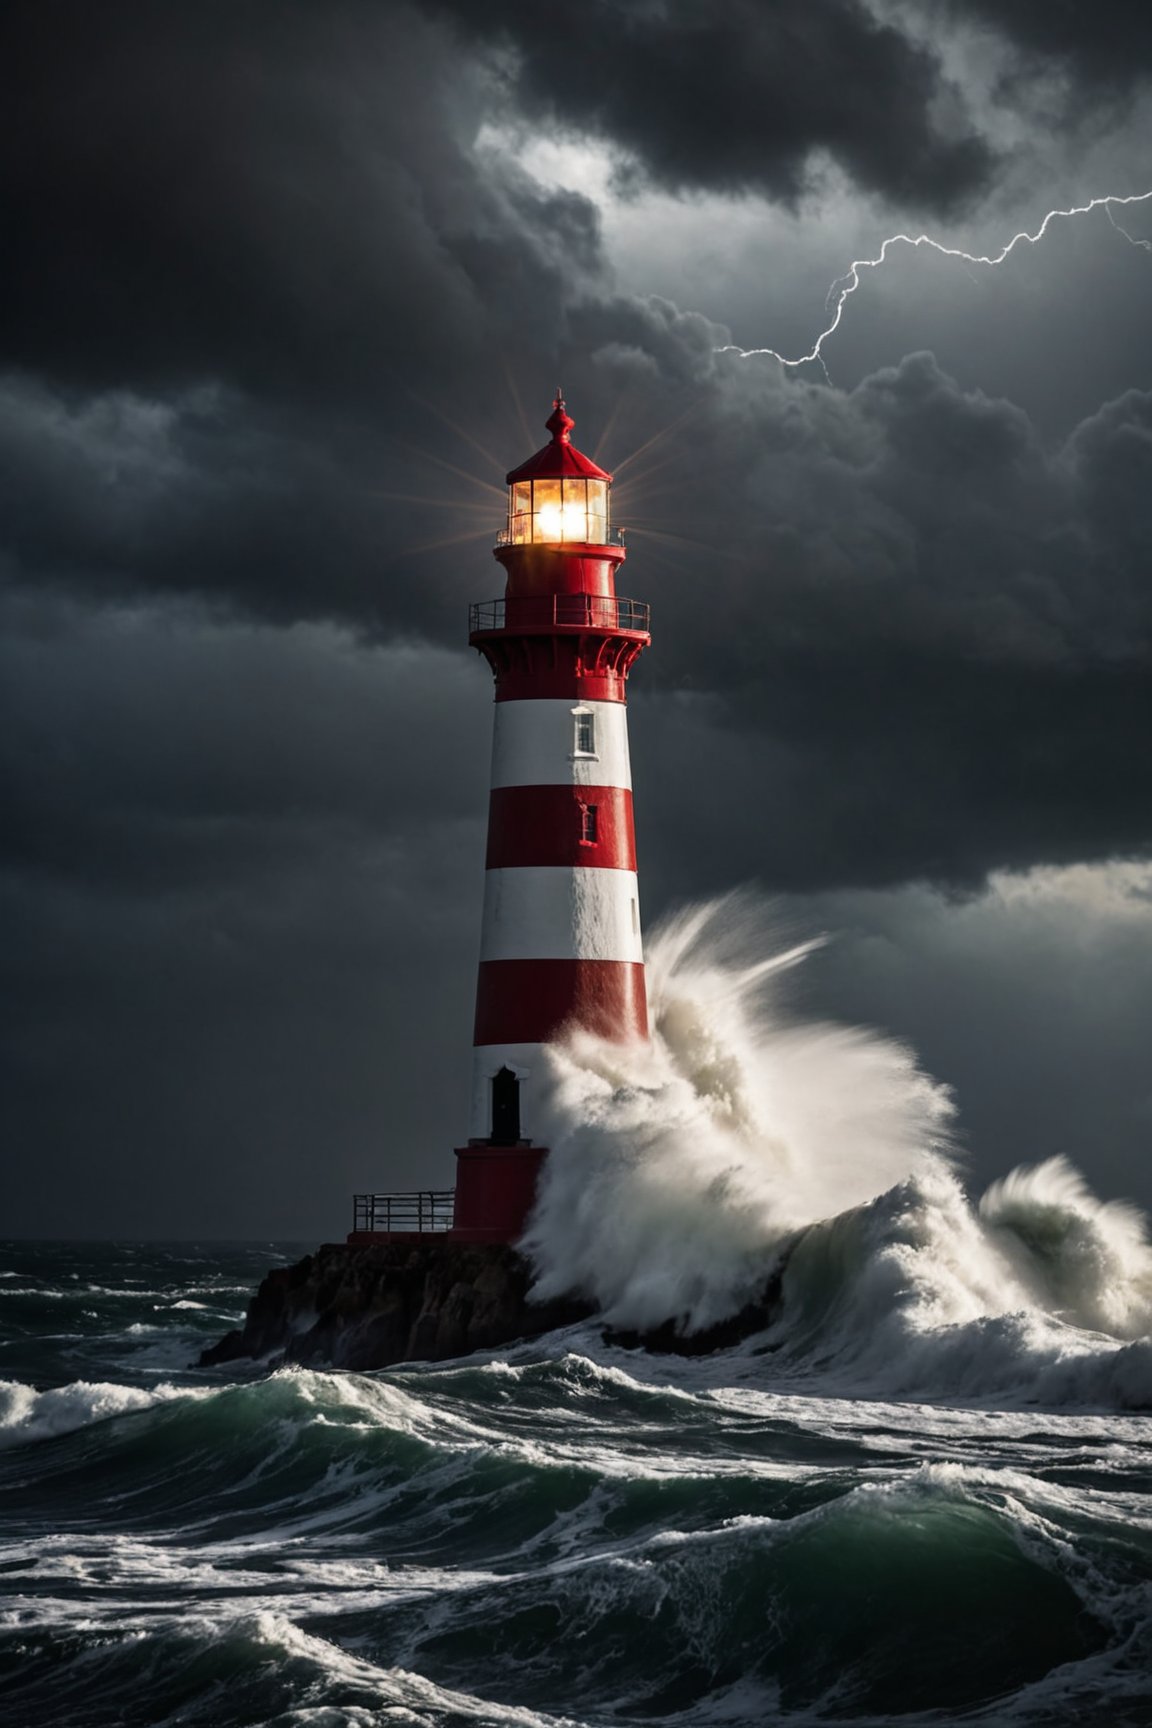 A light house in mids of a stormy sea, night, emitting light